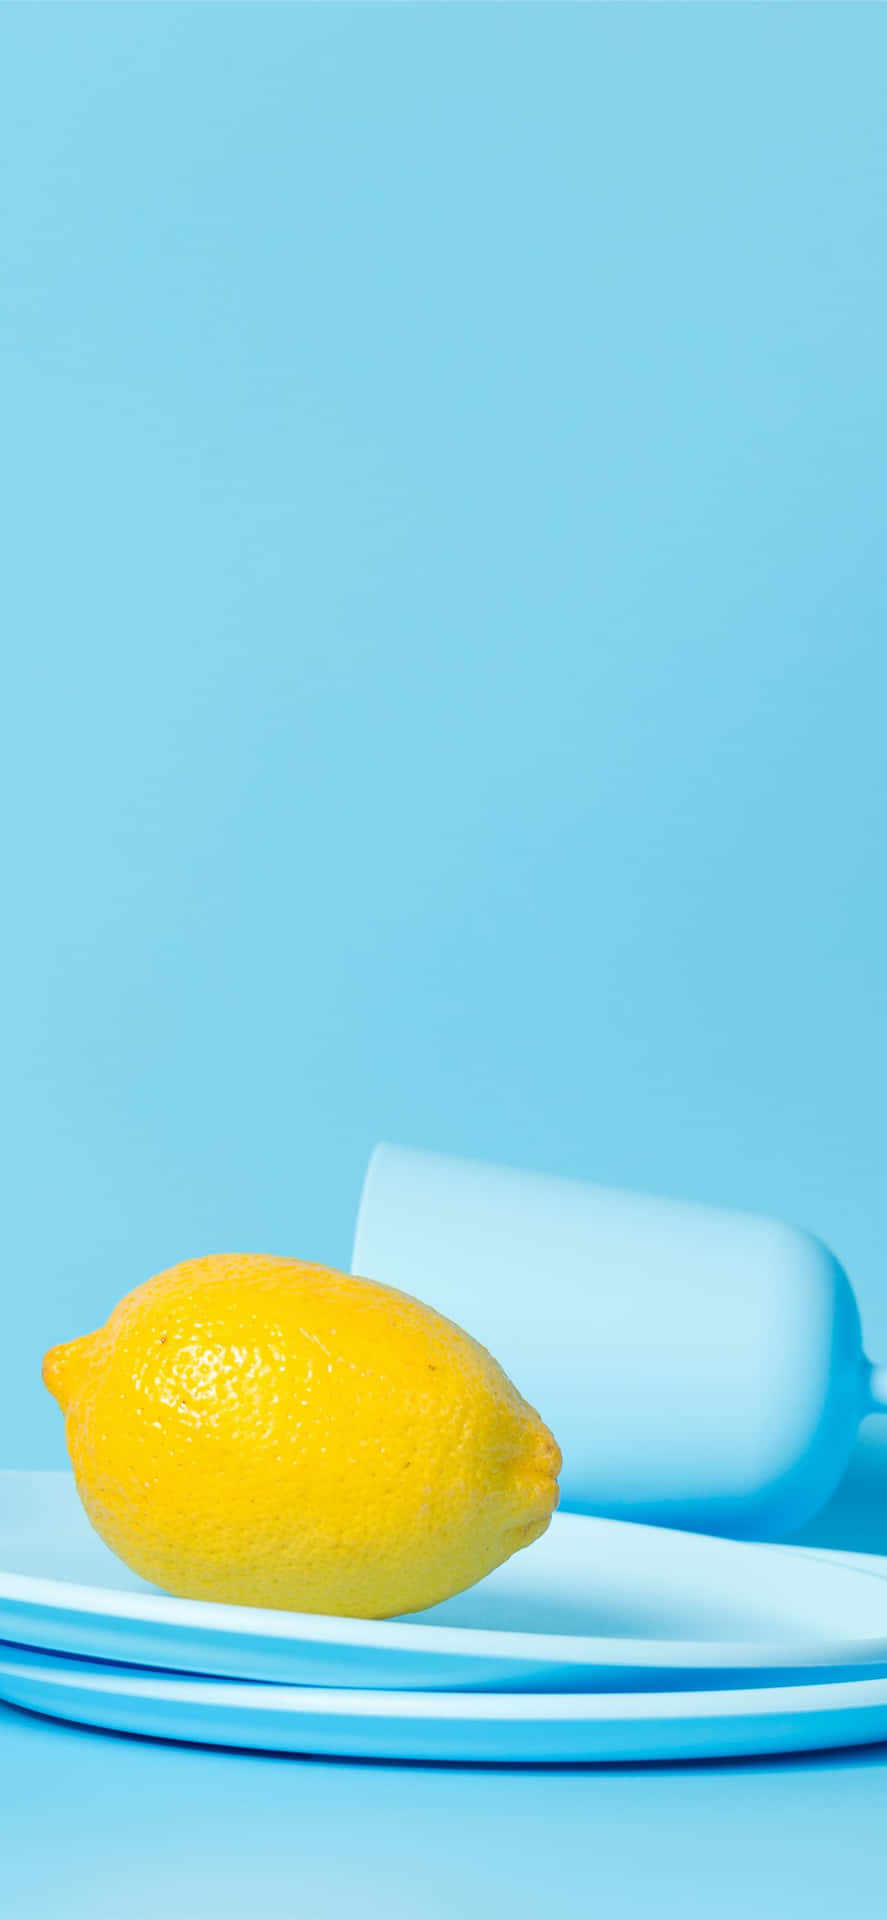 Brighten up your day with Lemon Iphone Wallpaper